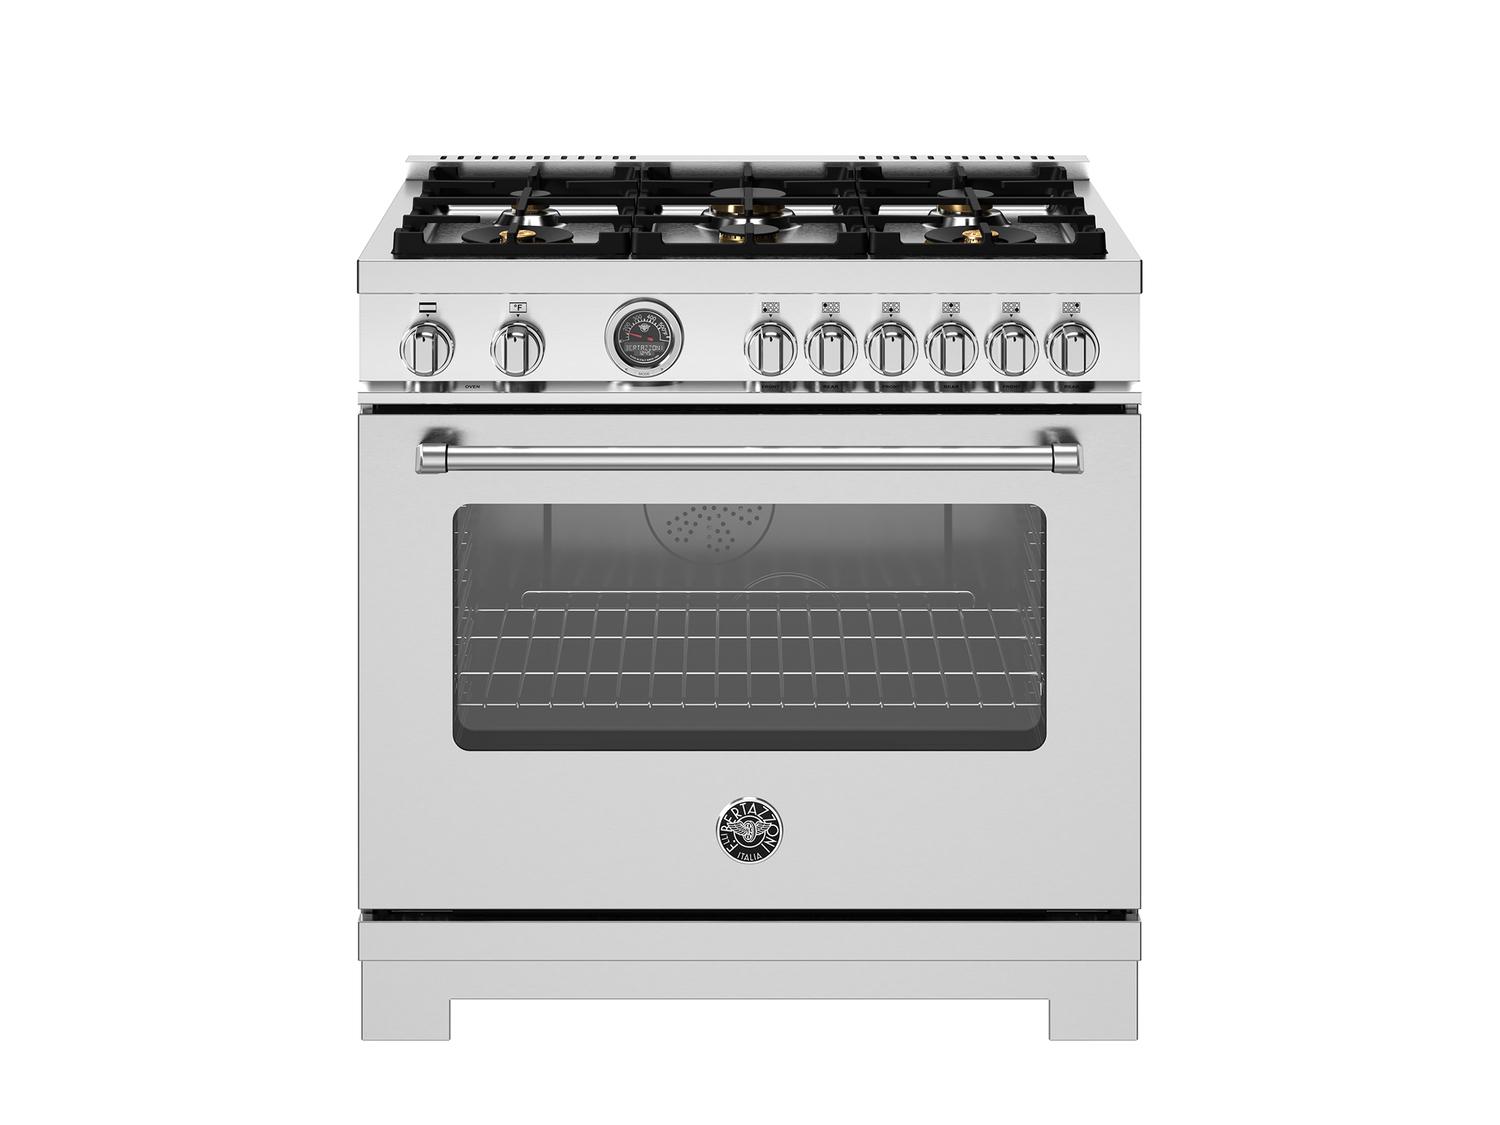 Bertazzoni MAS366BCFEPXT 36 Inch Dual Fuel Range, 6 Brass Burners And Cast Iron Griddle, Electric Self-Clean Oven Stainless Steel